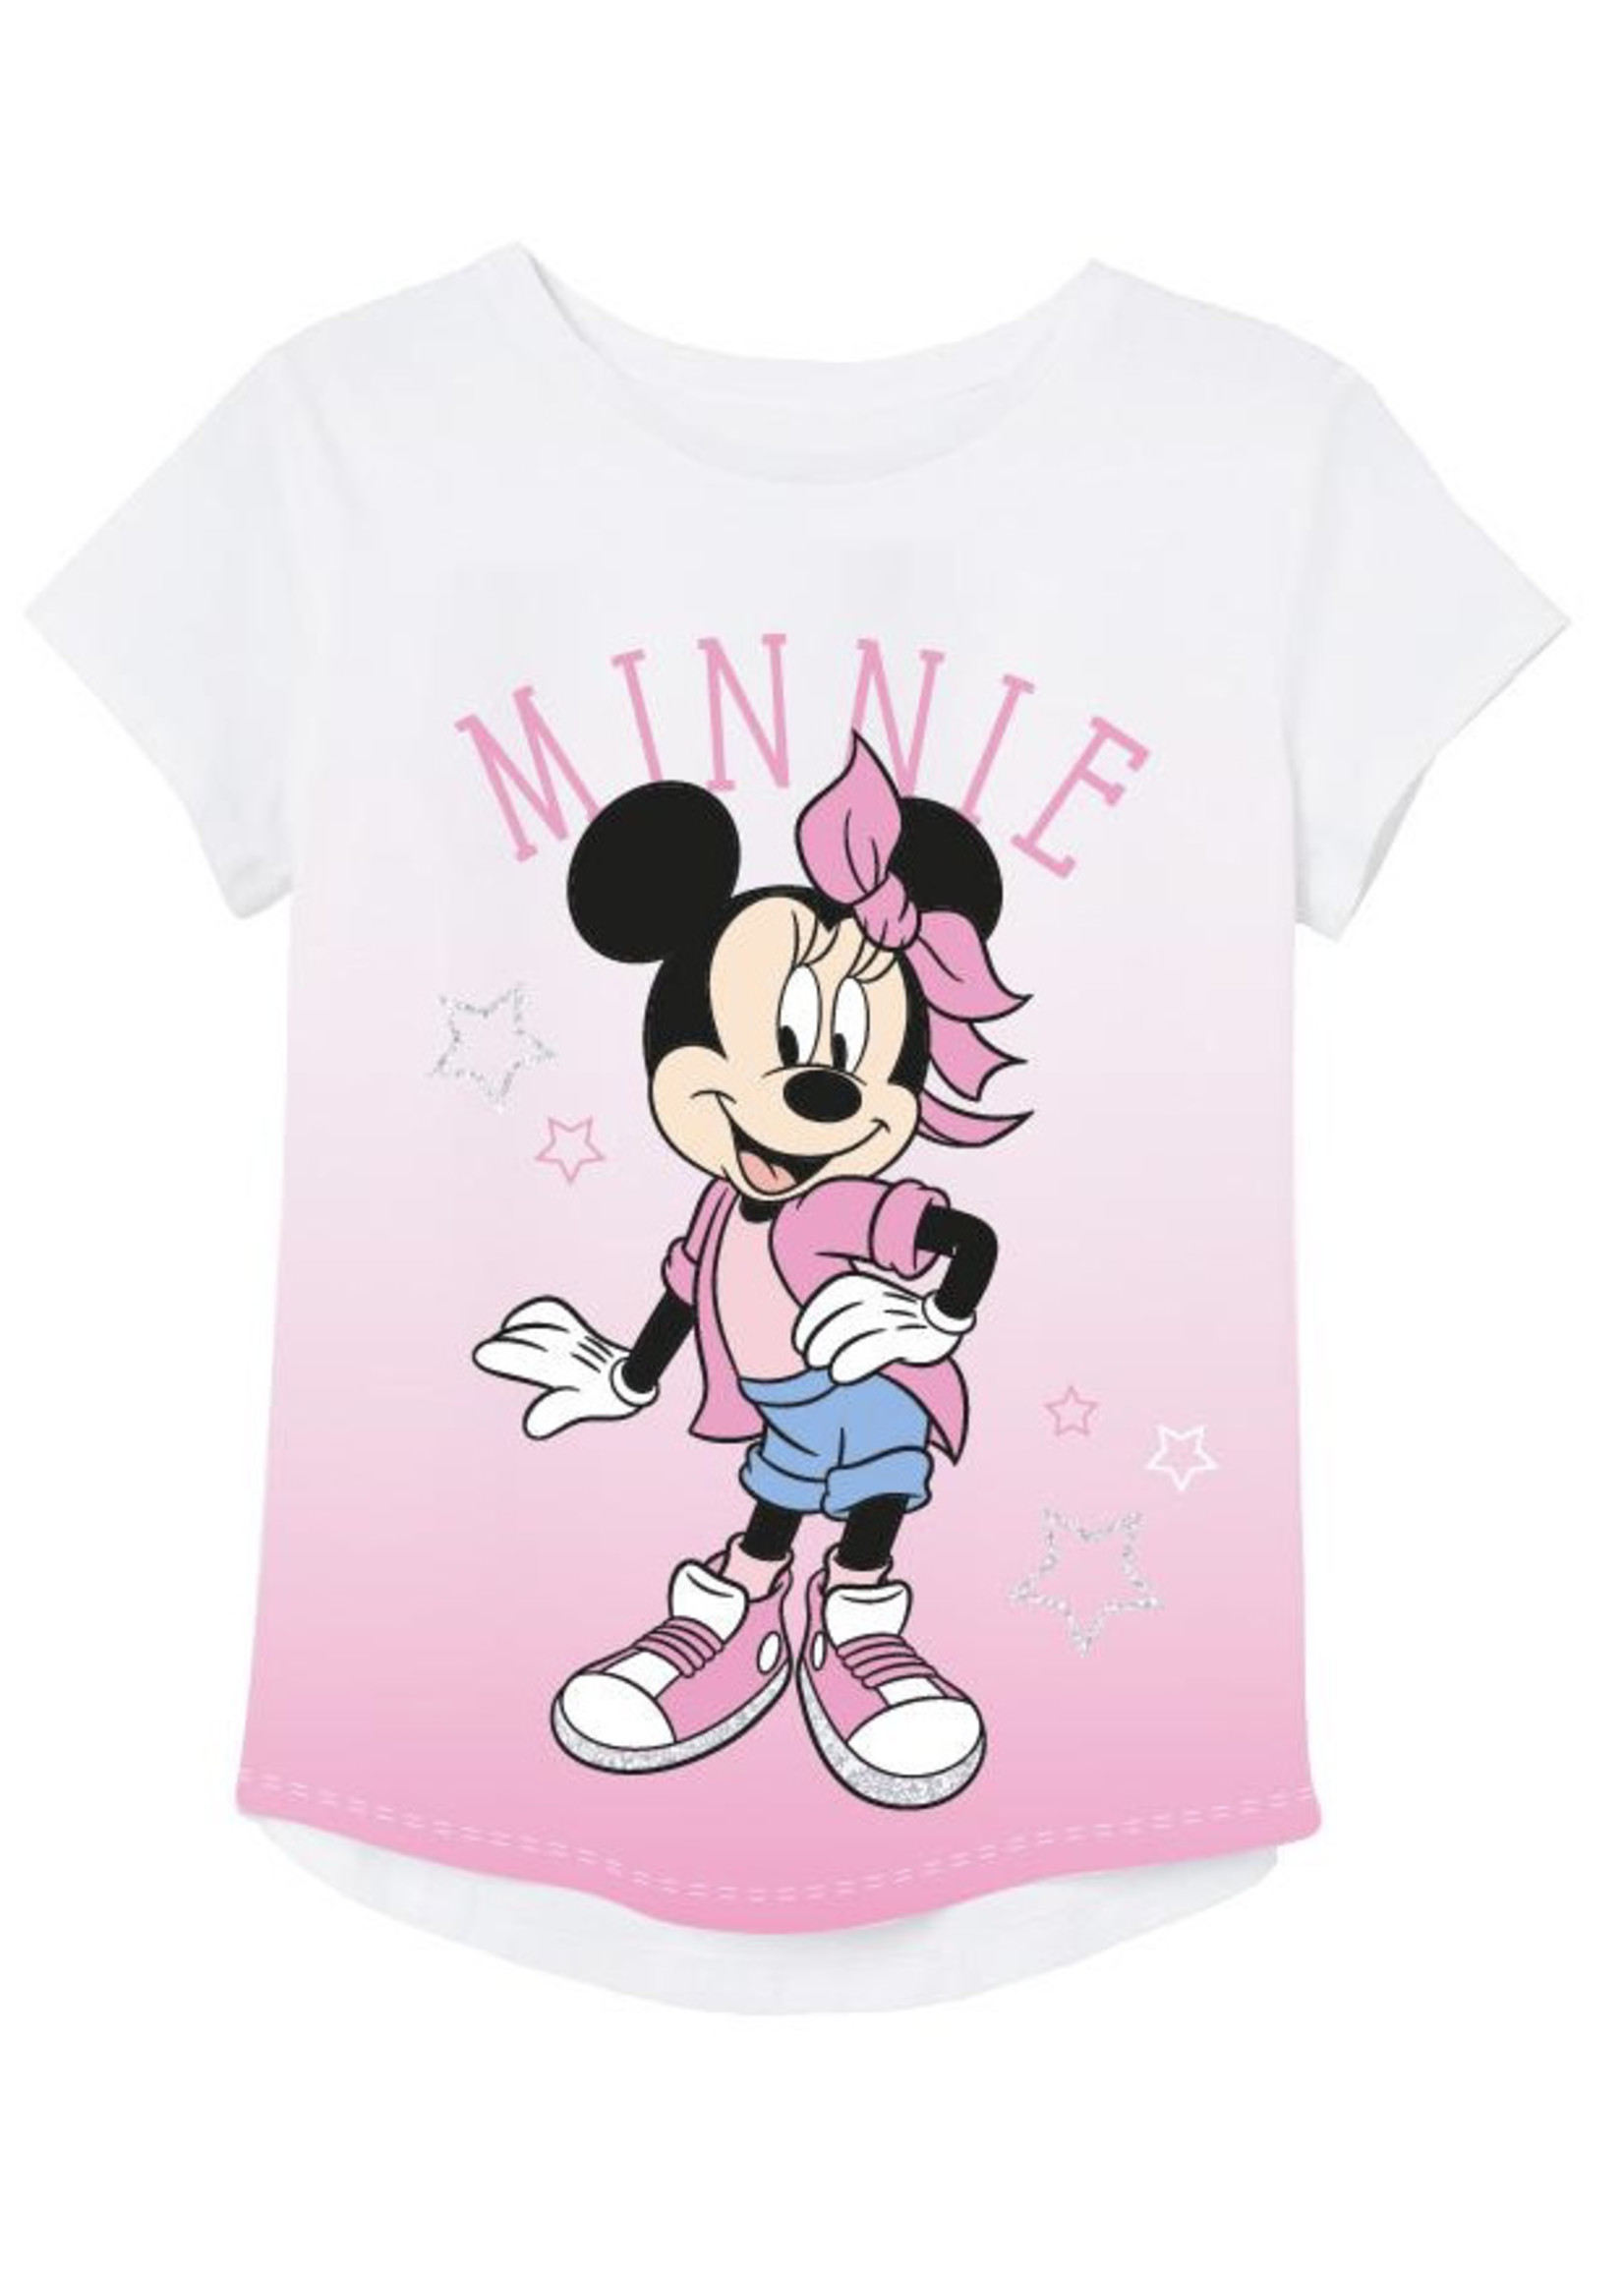 Disney Minnie Mouse T-shirt from Disney pink